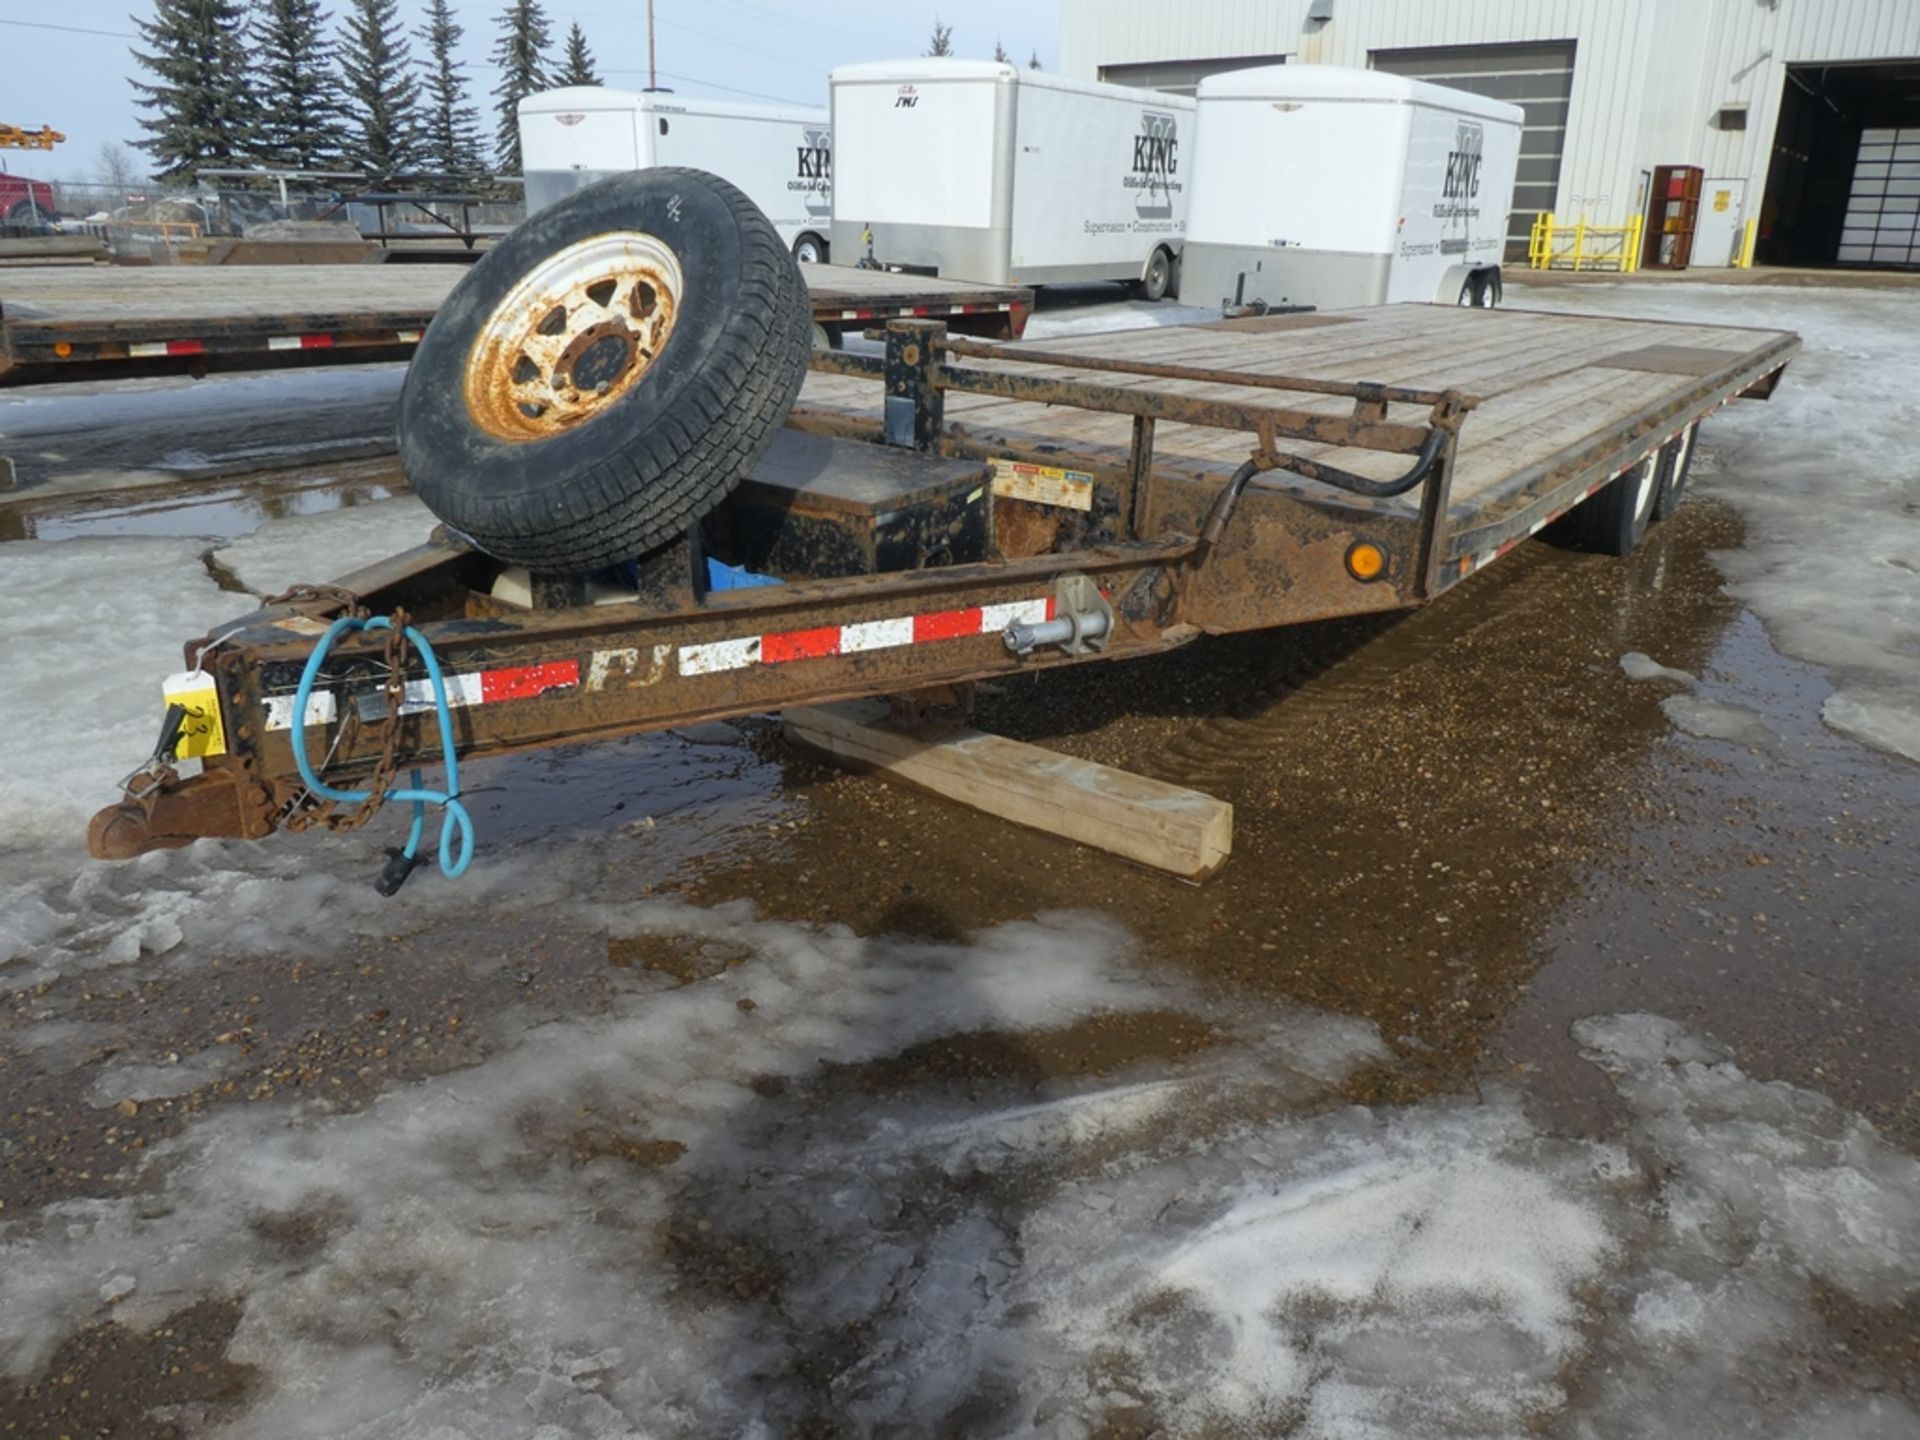 2013 PJ T/A 14000LB DECK-OVER EQUIPMENT TRAILERS W/RAMPS, BALL HITCH, 8'6" X 24FT - Image 5 of 5